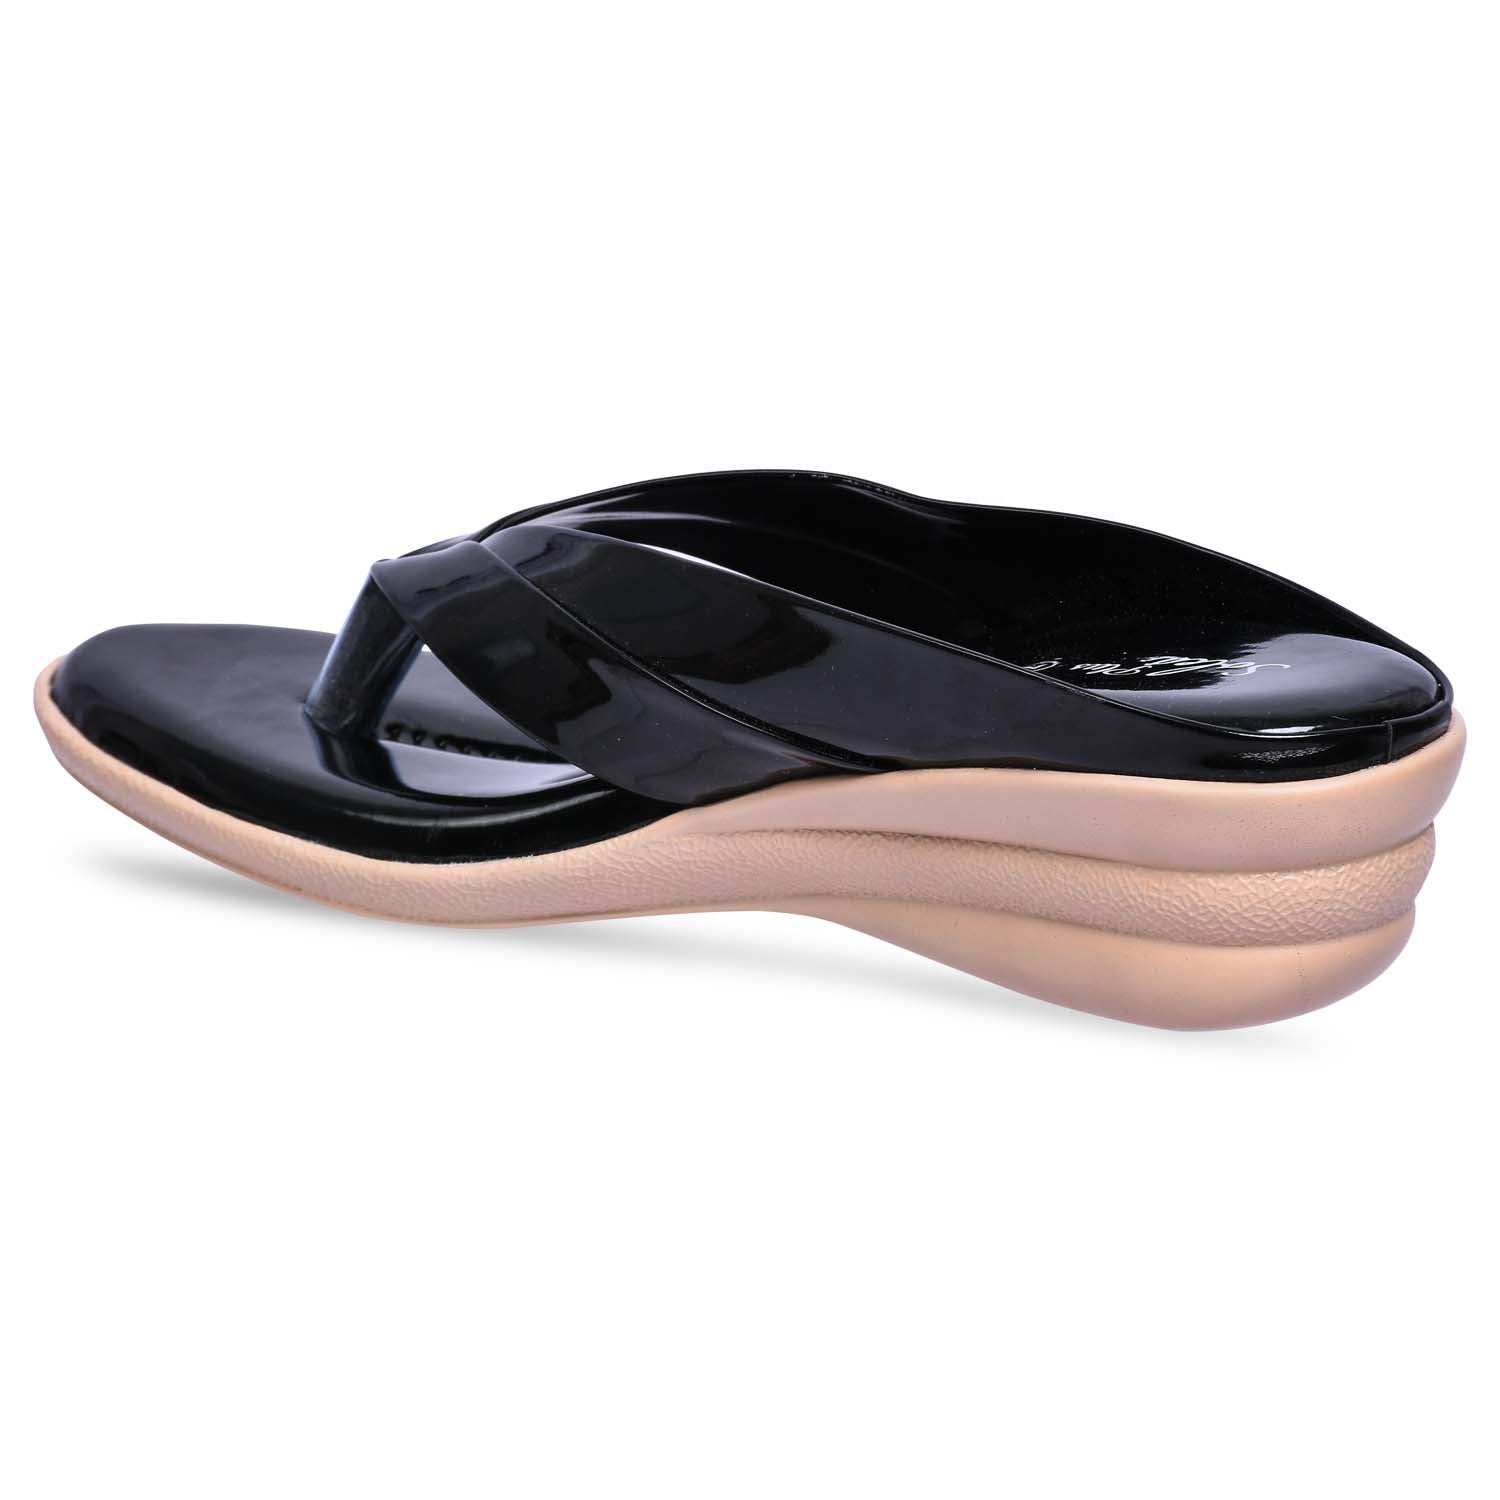 Paragon R1025L Women Sandals | Casual &amp; Formal Sandals | Stylish, Comfortable &amp; Durable | For Daily &amp; Occasion Wear